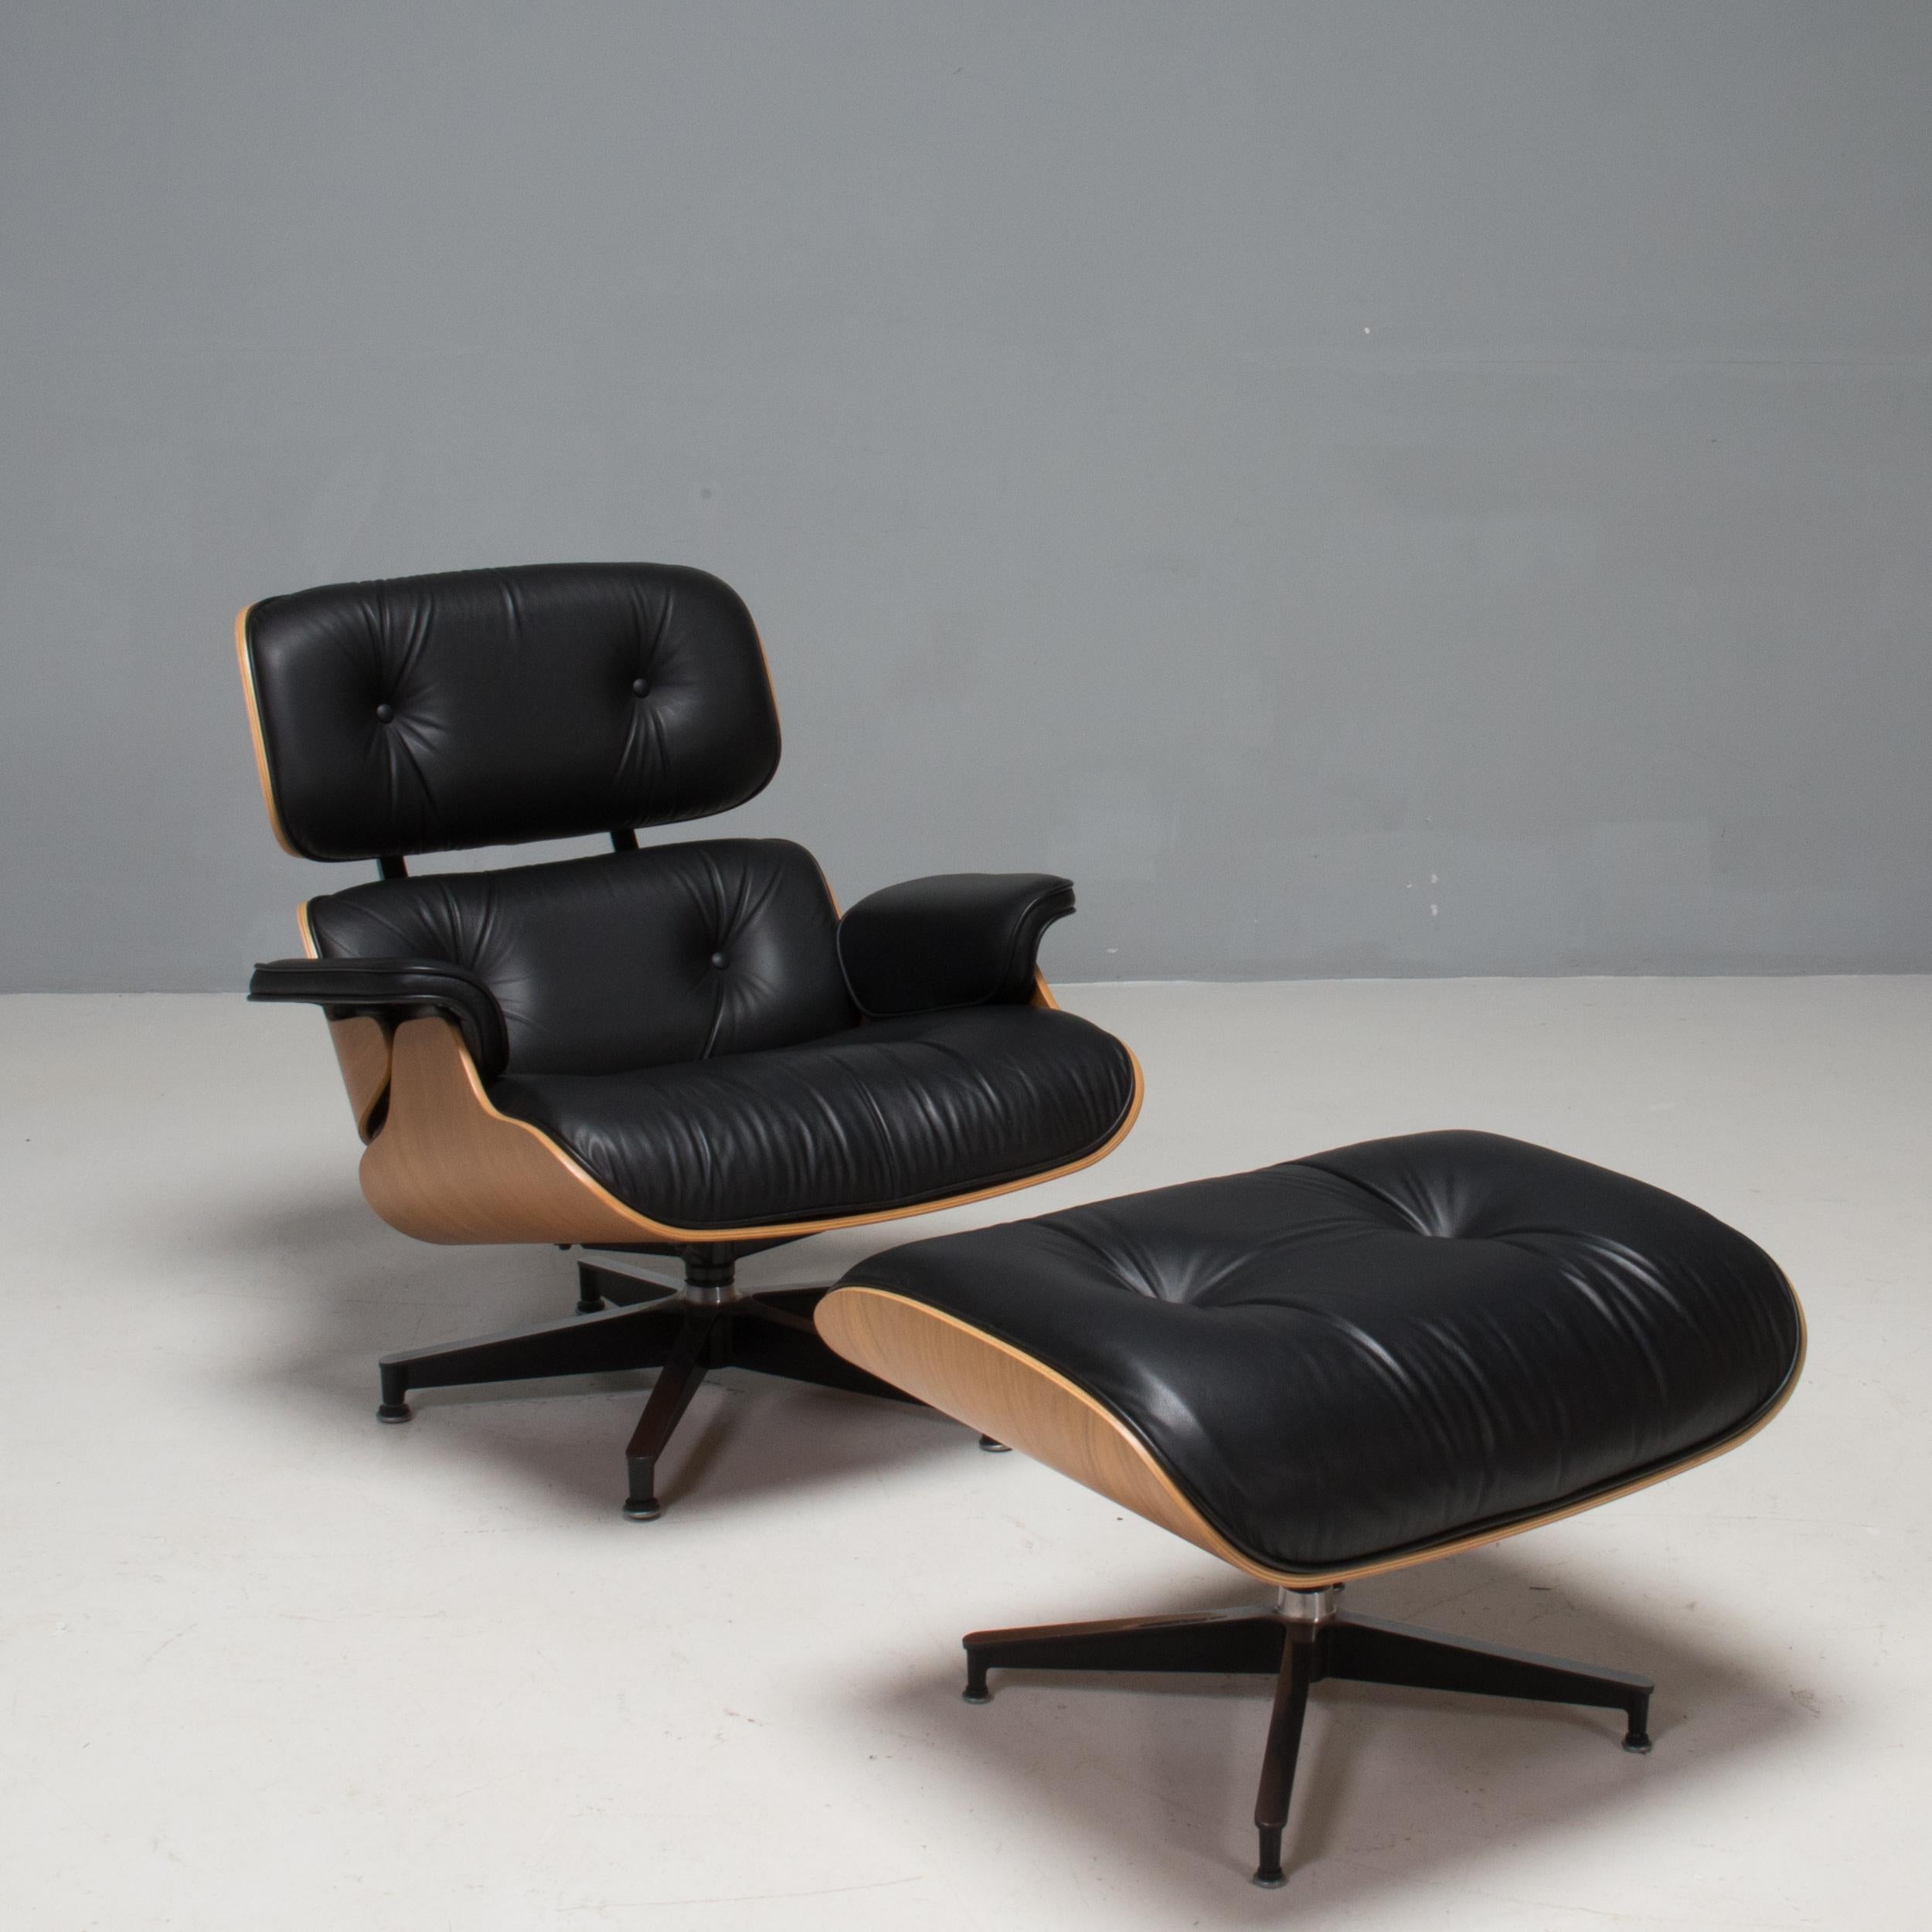 One of the most significant designs of the 20th Century, the Eames Lounge Chair and Ottoman was originally designed by Charles and Ray Eames and manufactured by Vitra.

Inspired by the inside of a baseball mitt and designed to be the ultimate